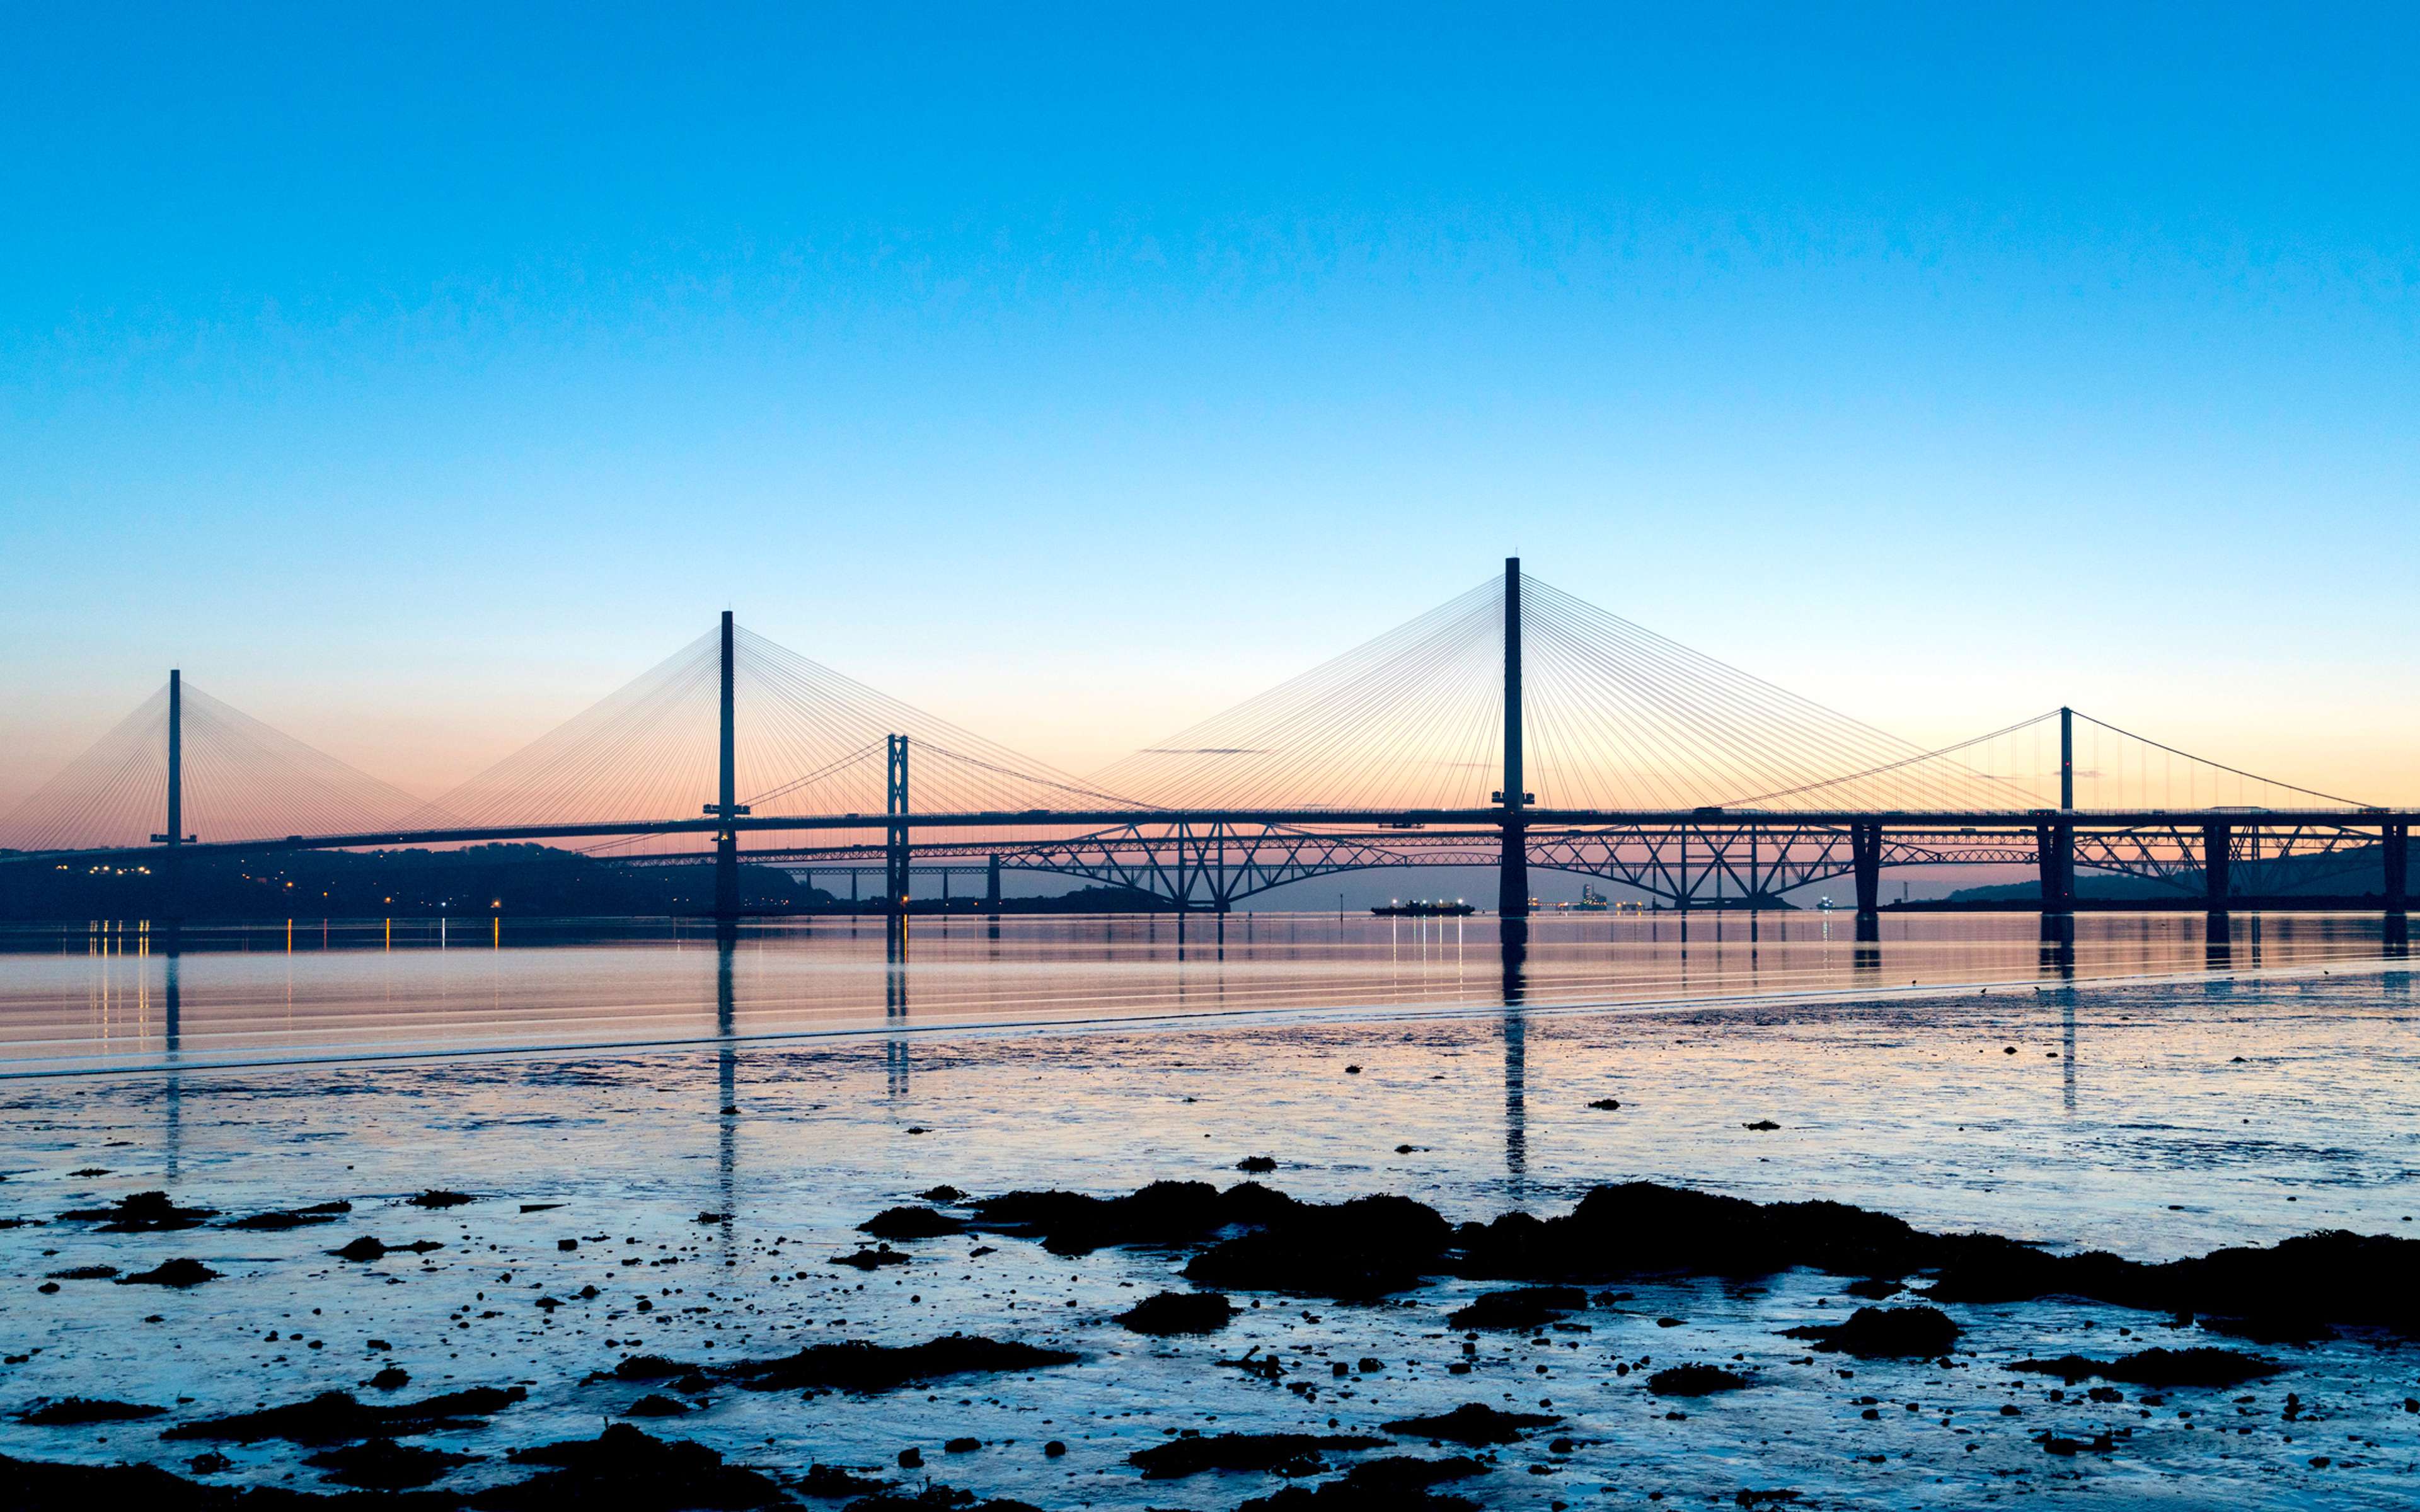 Sunrise view of the three major bridges crossing the Firth of Forth at South Queensferry.